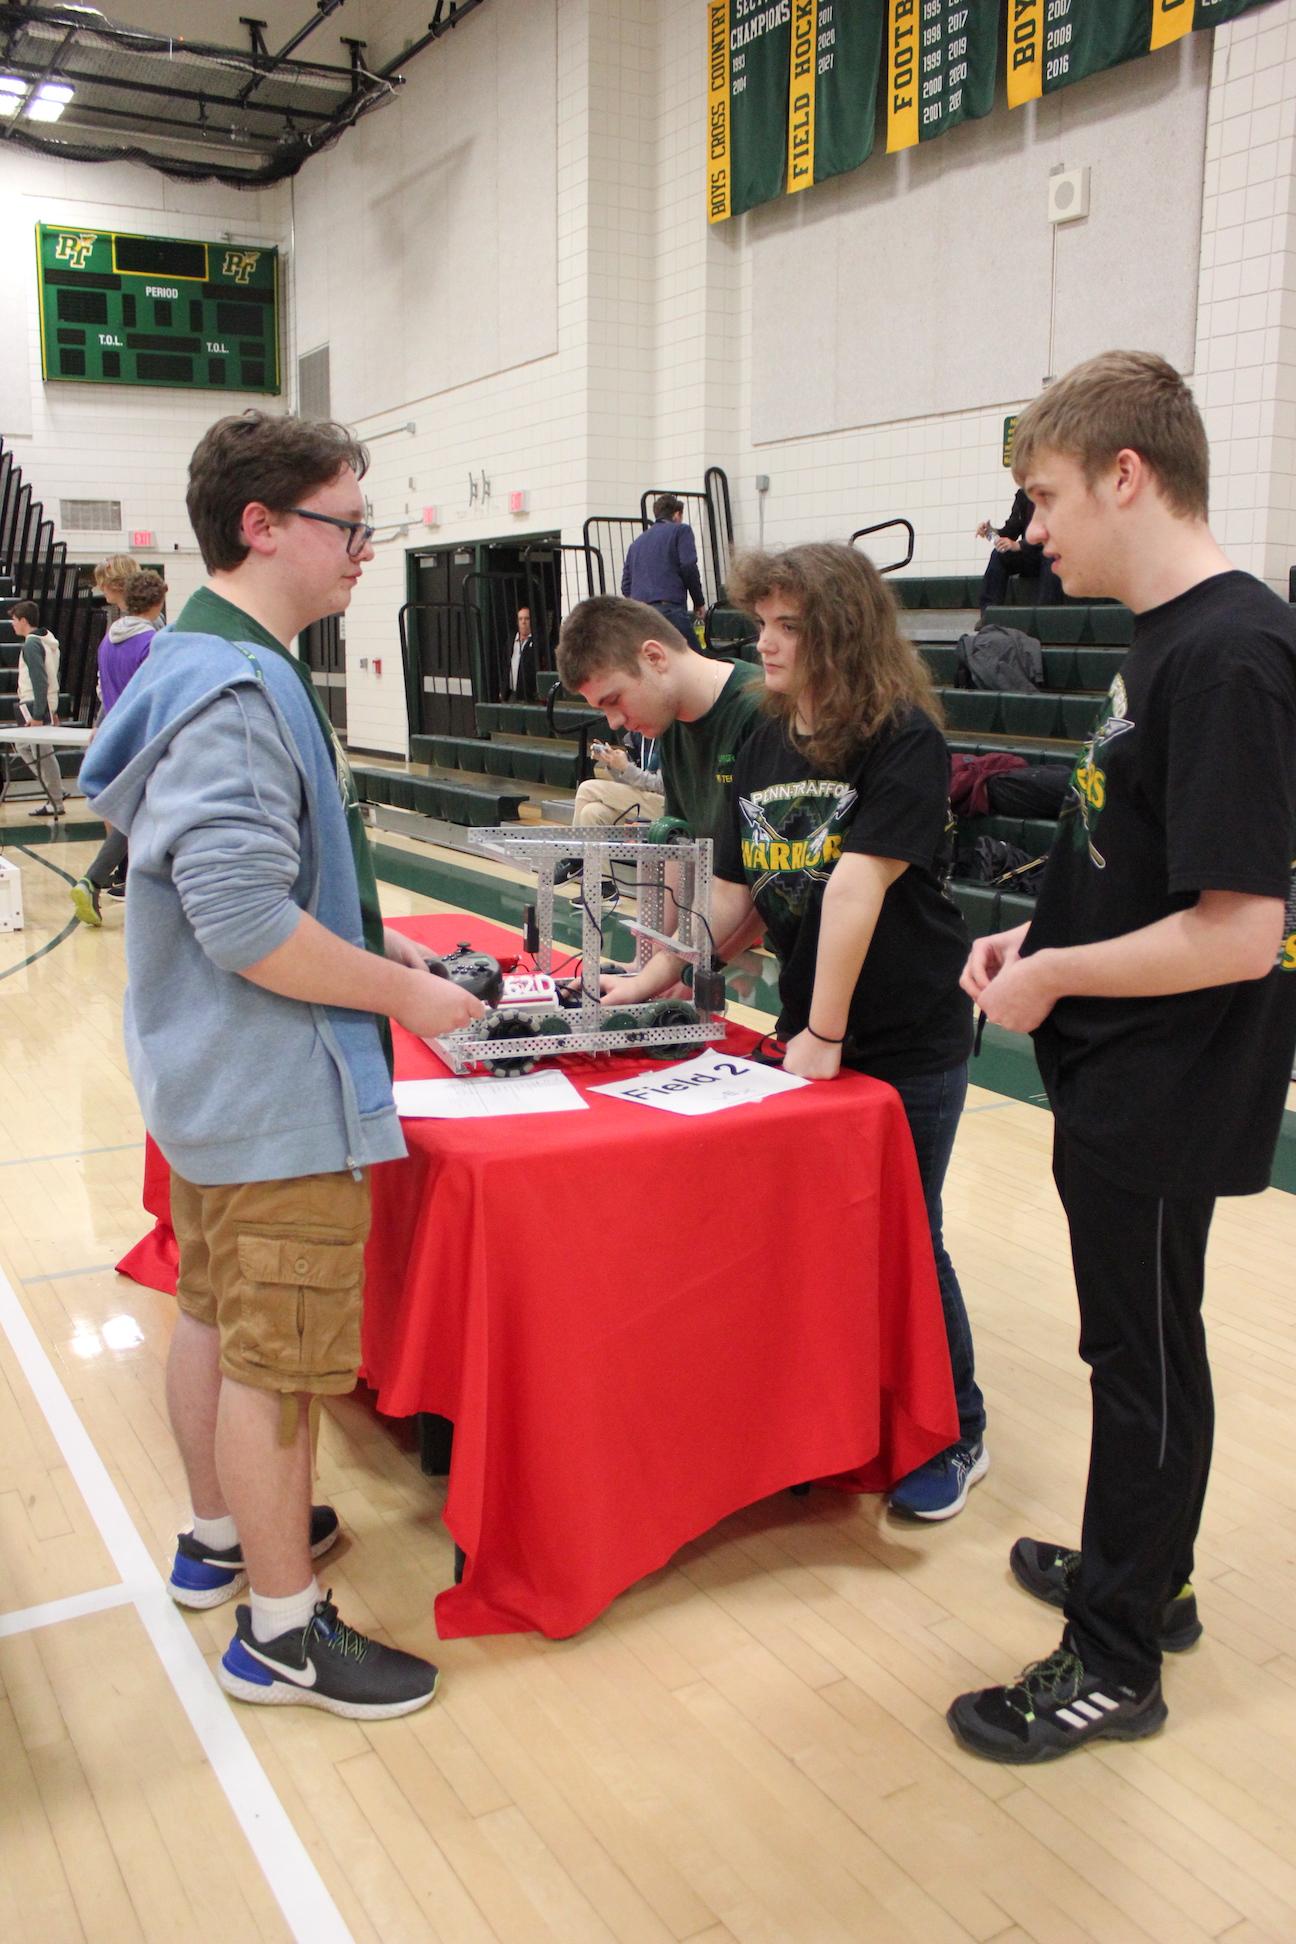 Penn-Trafford team #1462D prepares for a match (Left to right) Frankie Coakley, Brant Urban, Jessica Graham, and Kolin Ditter